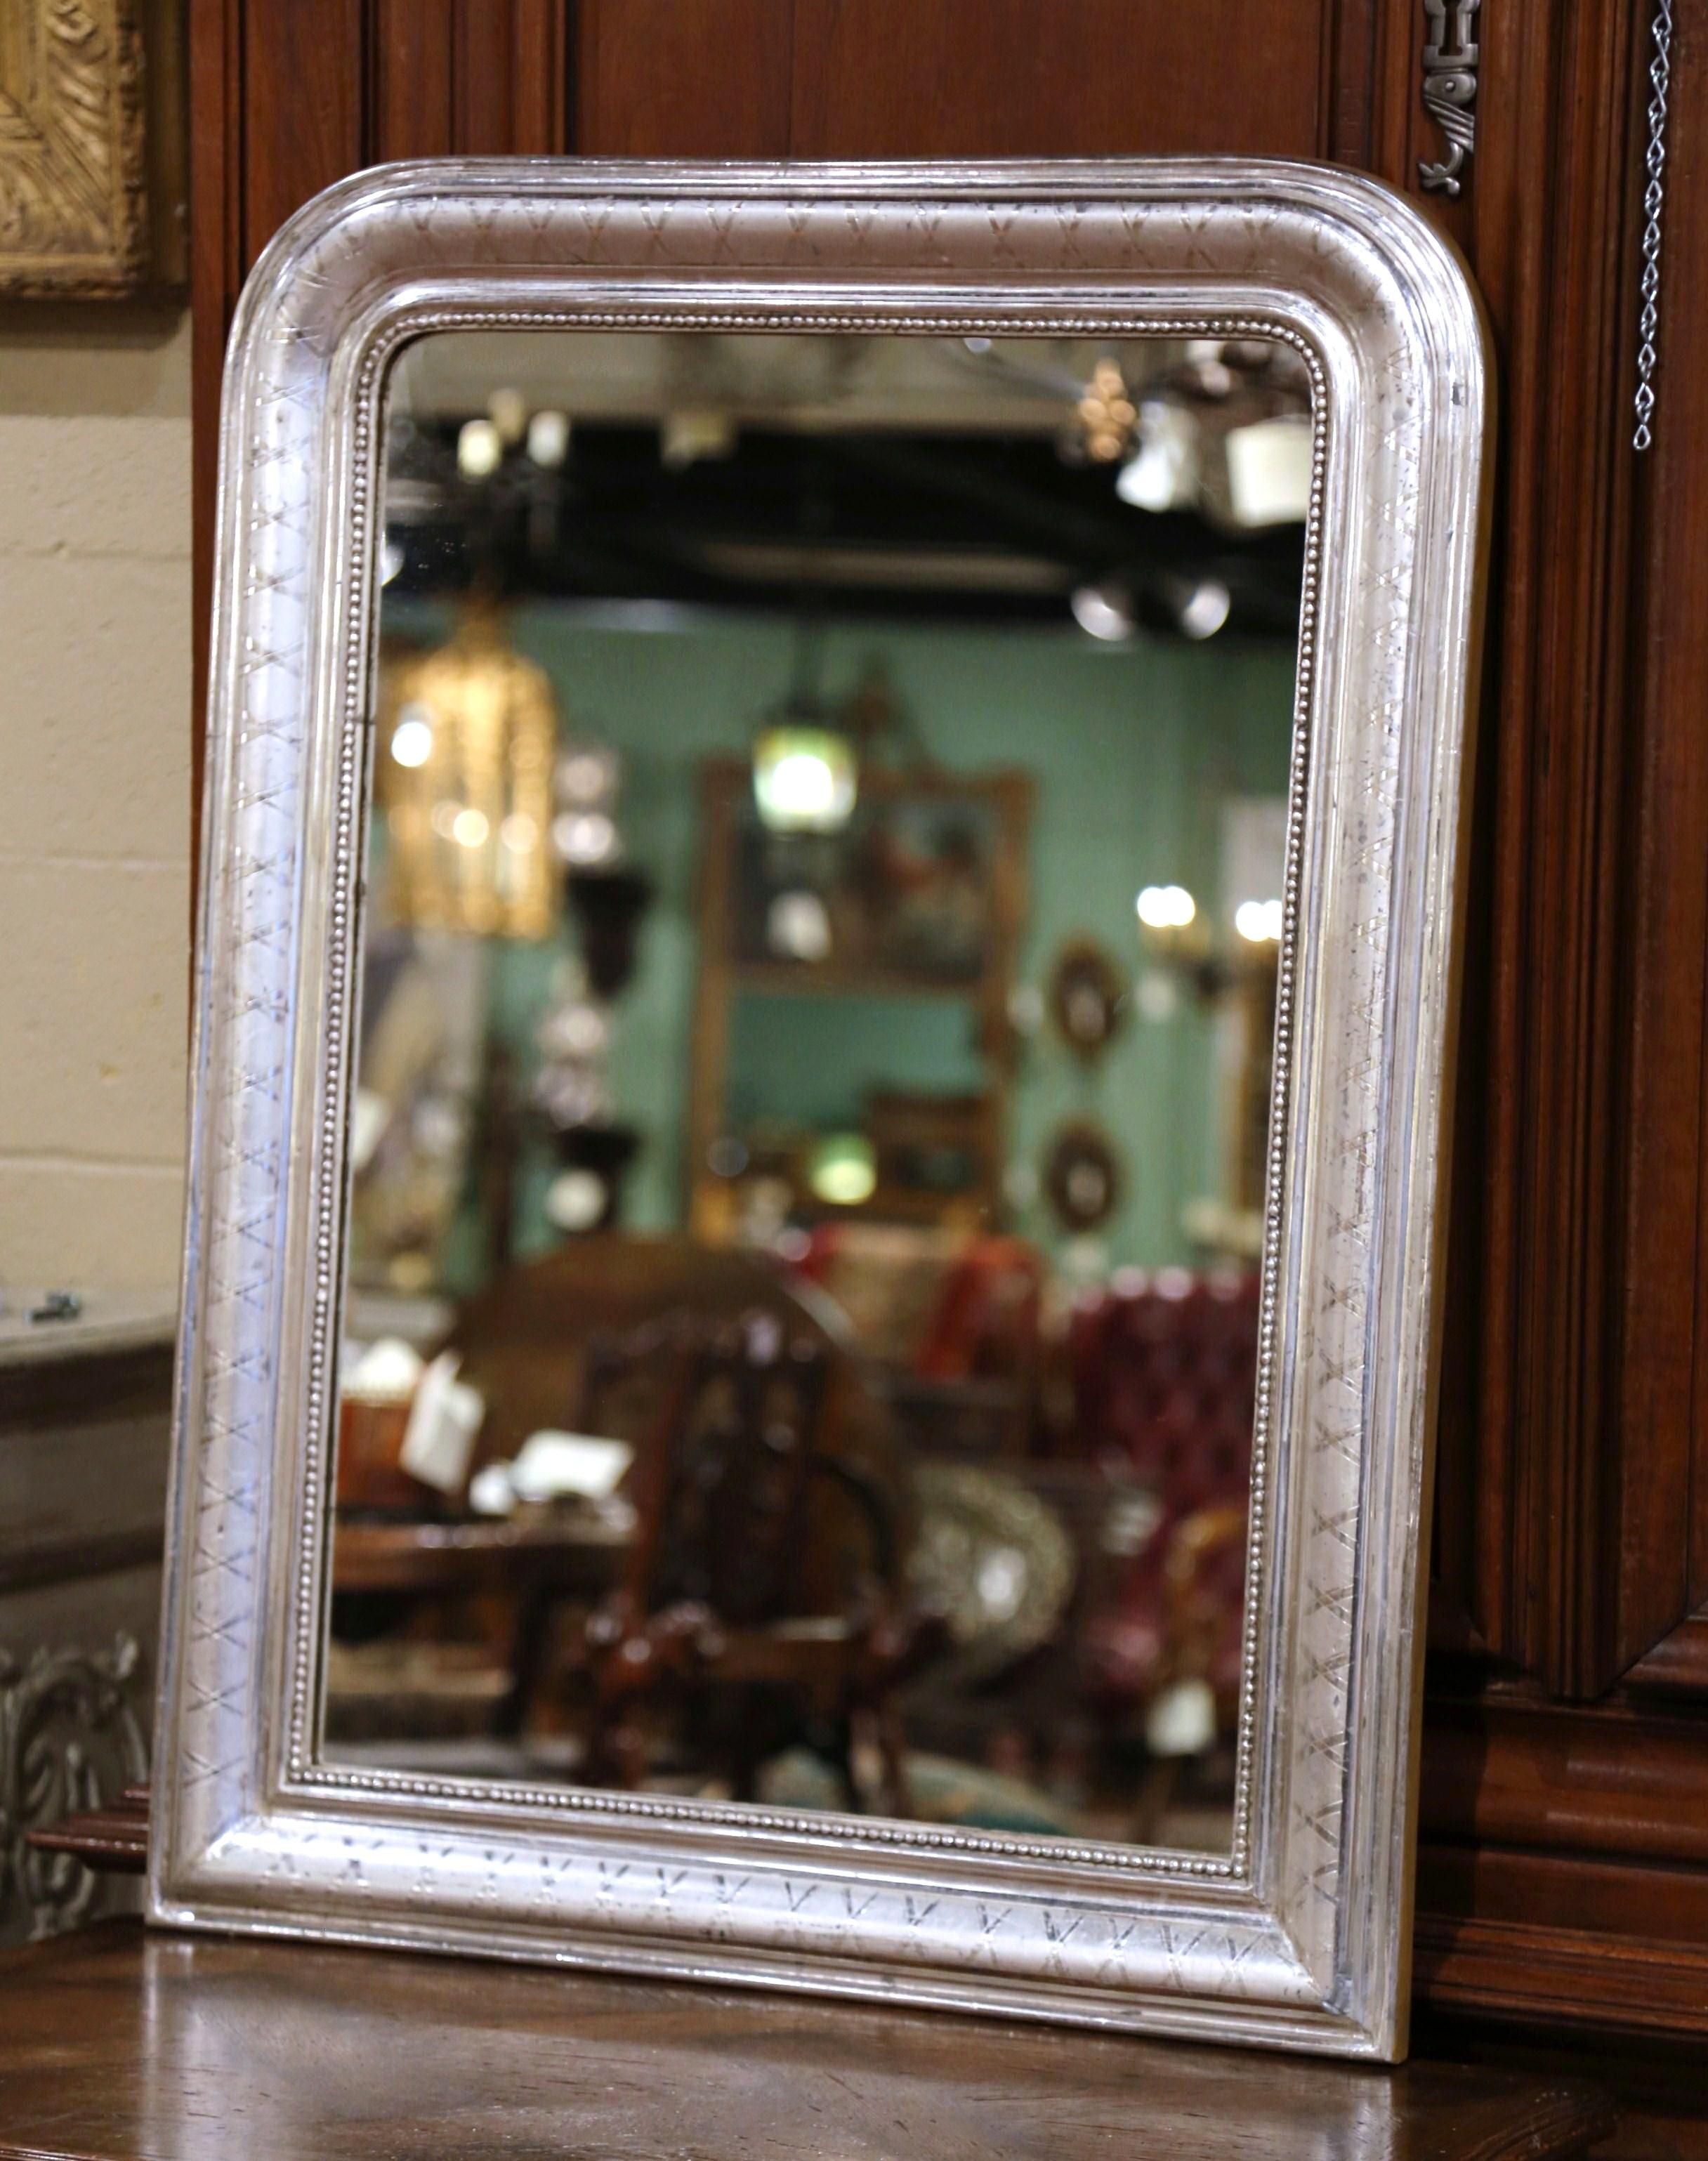 Crafted in the Burgundy region of France, circa 1870, the rectangular wall mirror has traditional, timeless lines with rounded corners. The frame is decorated with a luxurious silver leaf finish, further embellished with a discrete engraved X decor